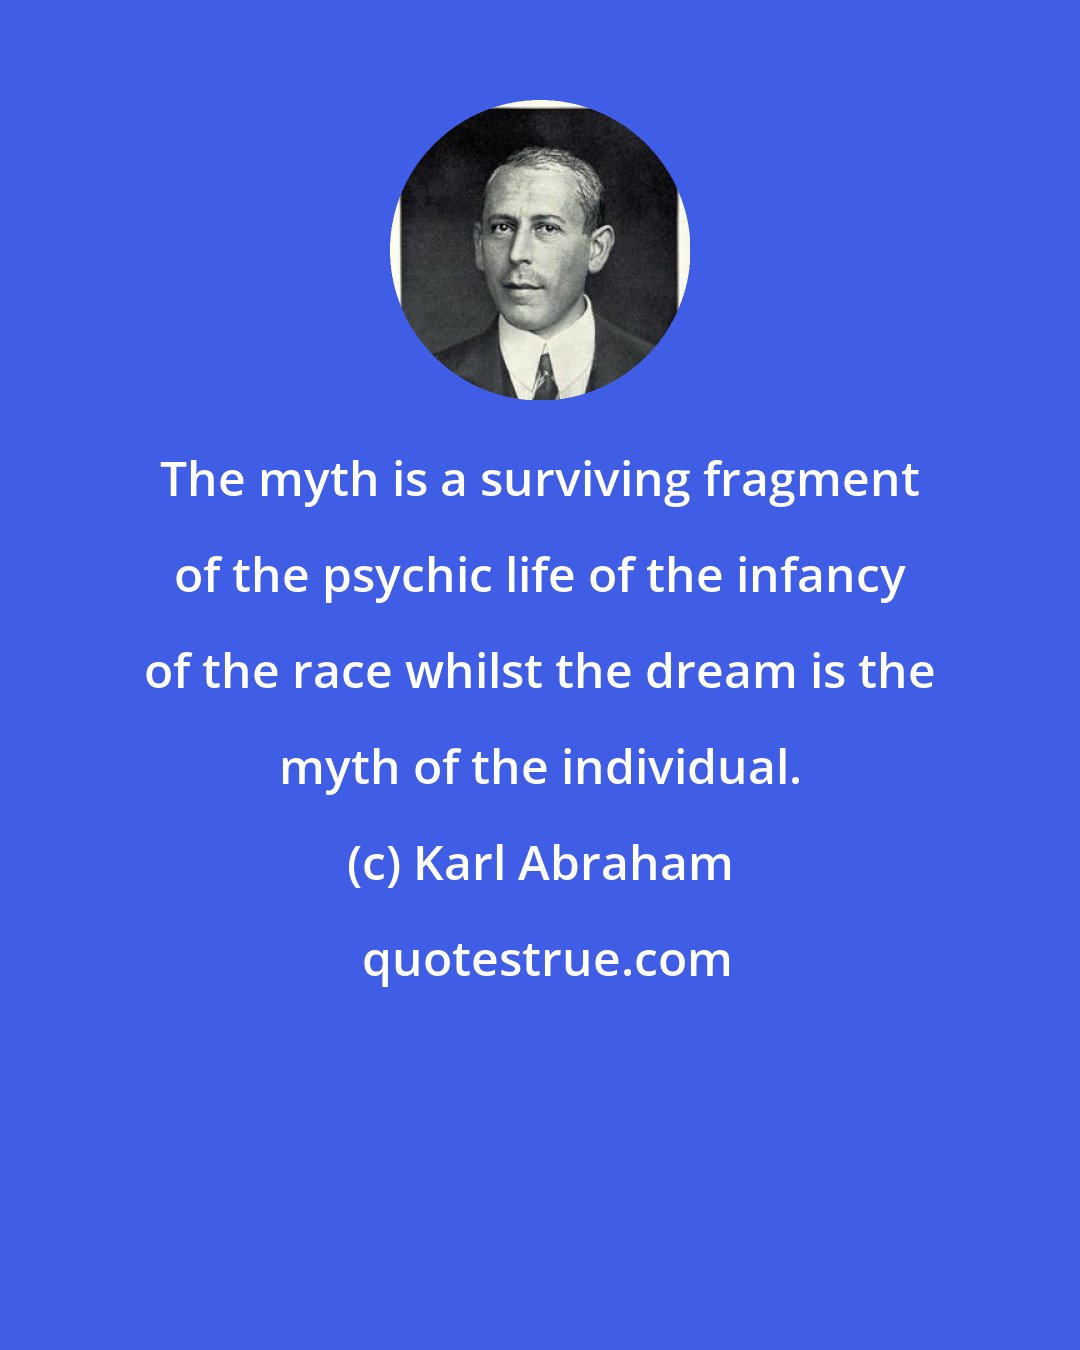 Karl Abraham: The myth is a surviving fragment of the psychic life of the infancy of the race whilst the dream is the myth of the individual.